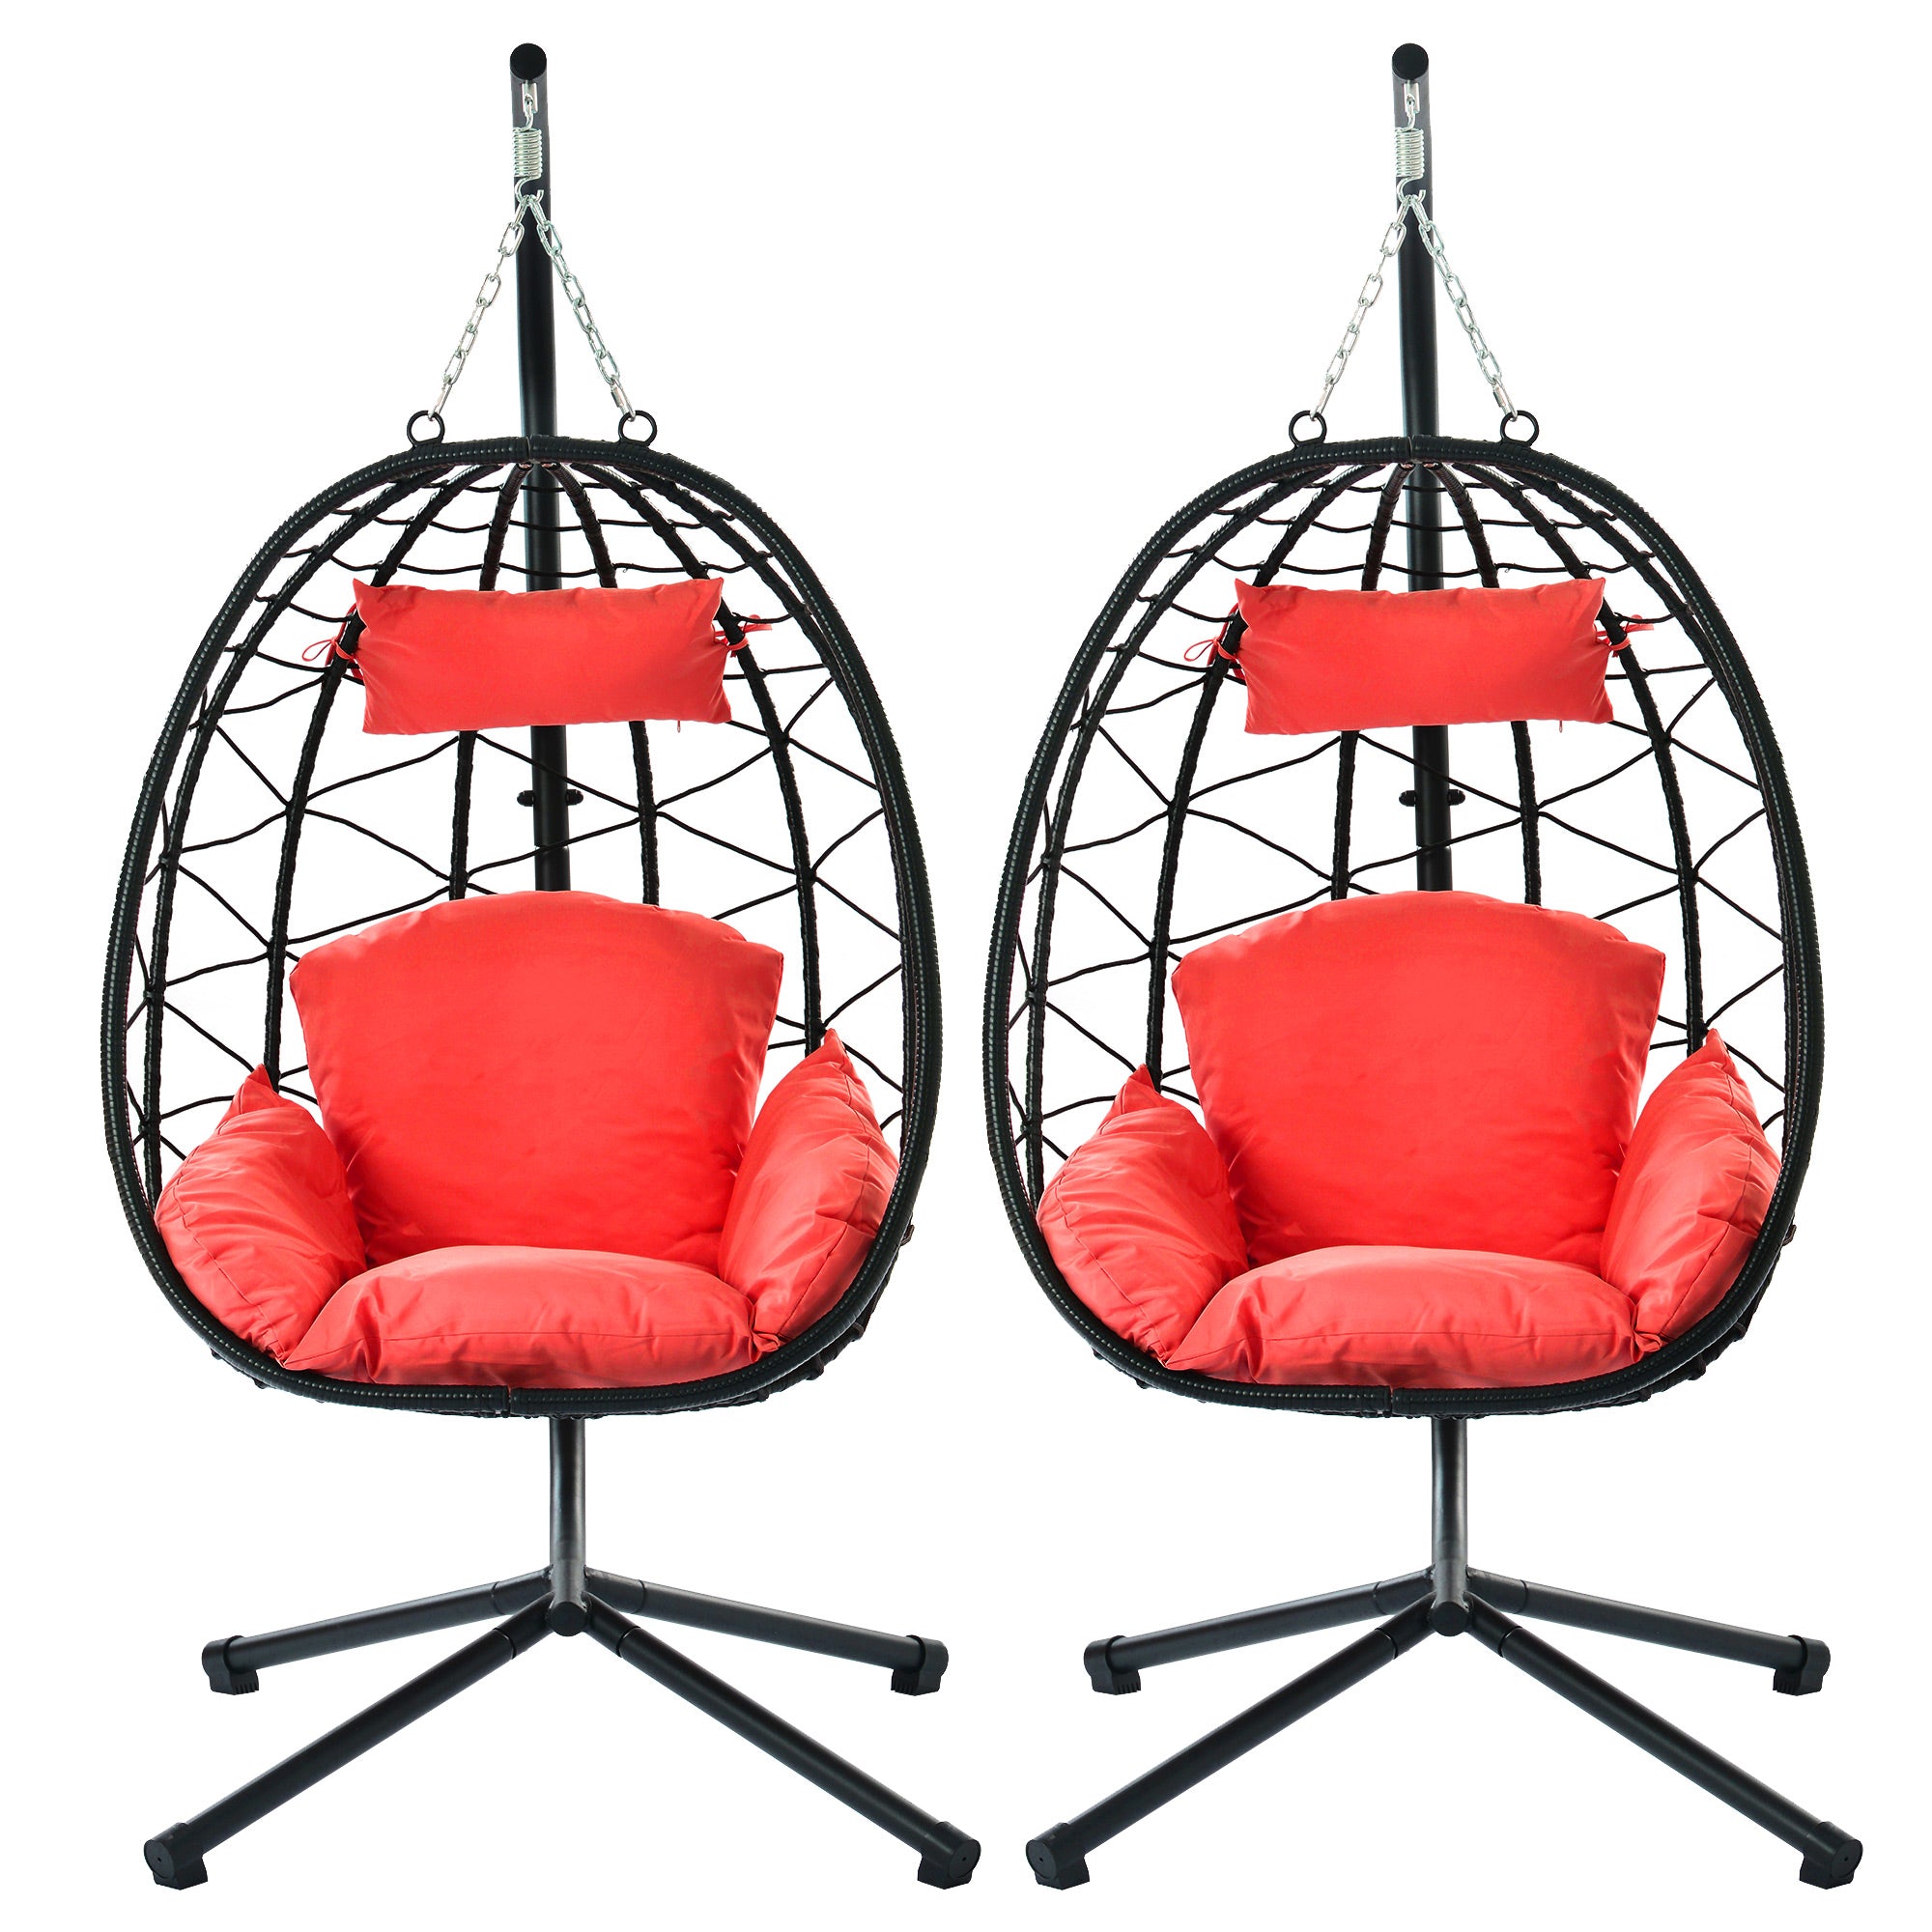 SYNGAR 2 Piece Indoor Outdoor Patio Wicker Hanging Chairs, Swing Hammock Egg Chairs Waterproof Cushions with Steel Frame, 300lbs Capacity for Patio Balcony Bedroom Living Room, Red